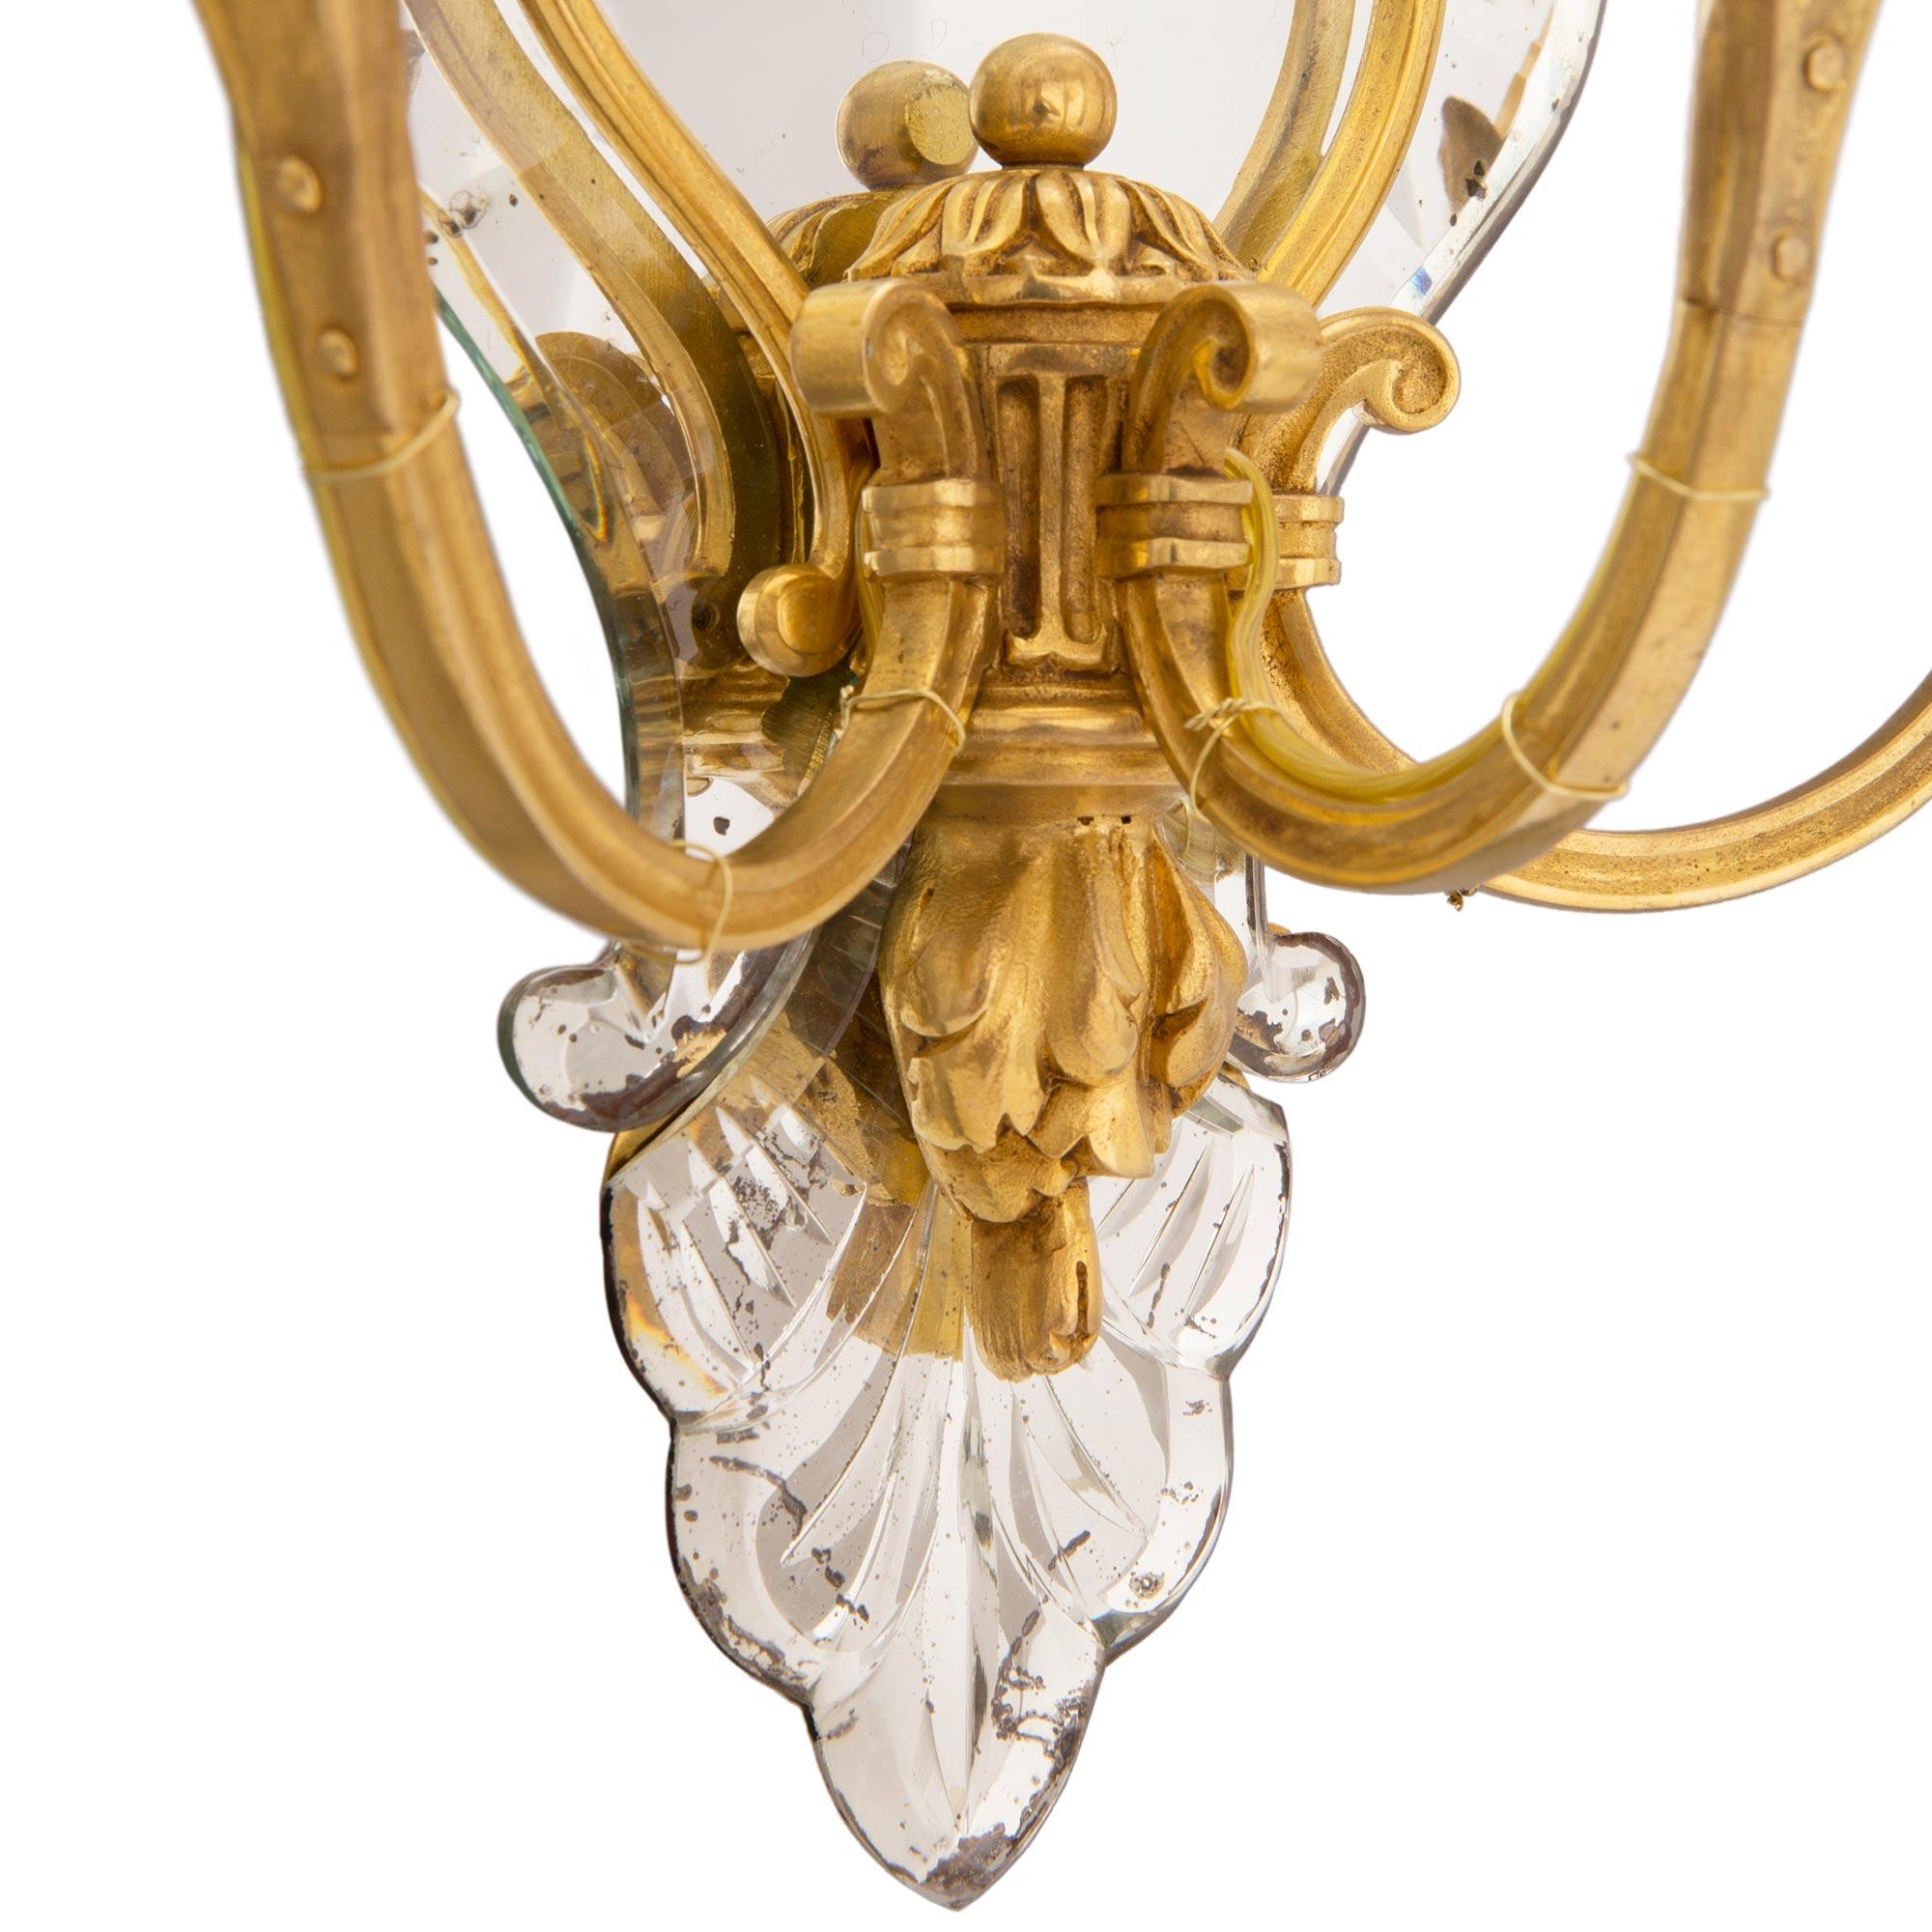 Pair of French Turn-of-the-Century Venetian Style Ormolu and Mirrored Sconces For Sale 2